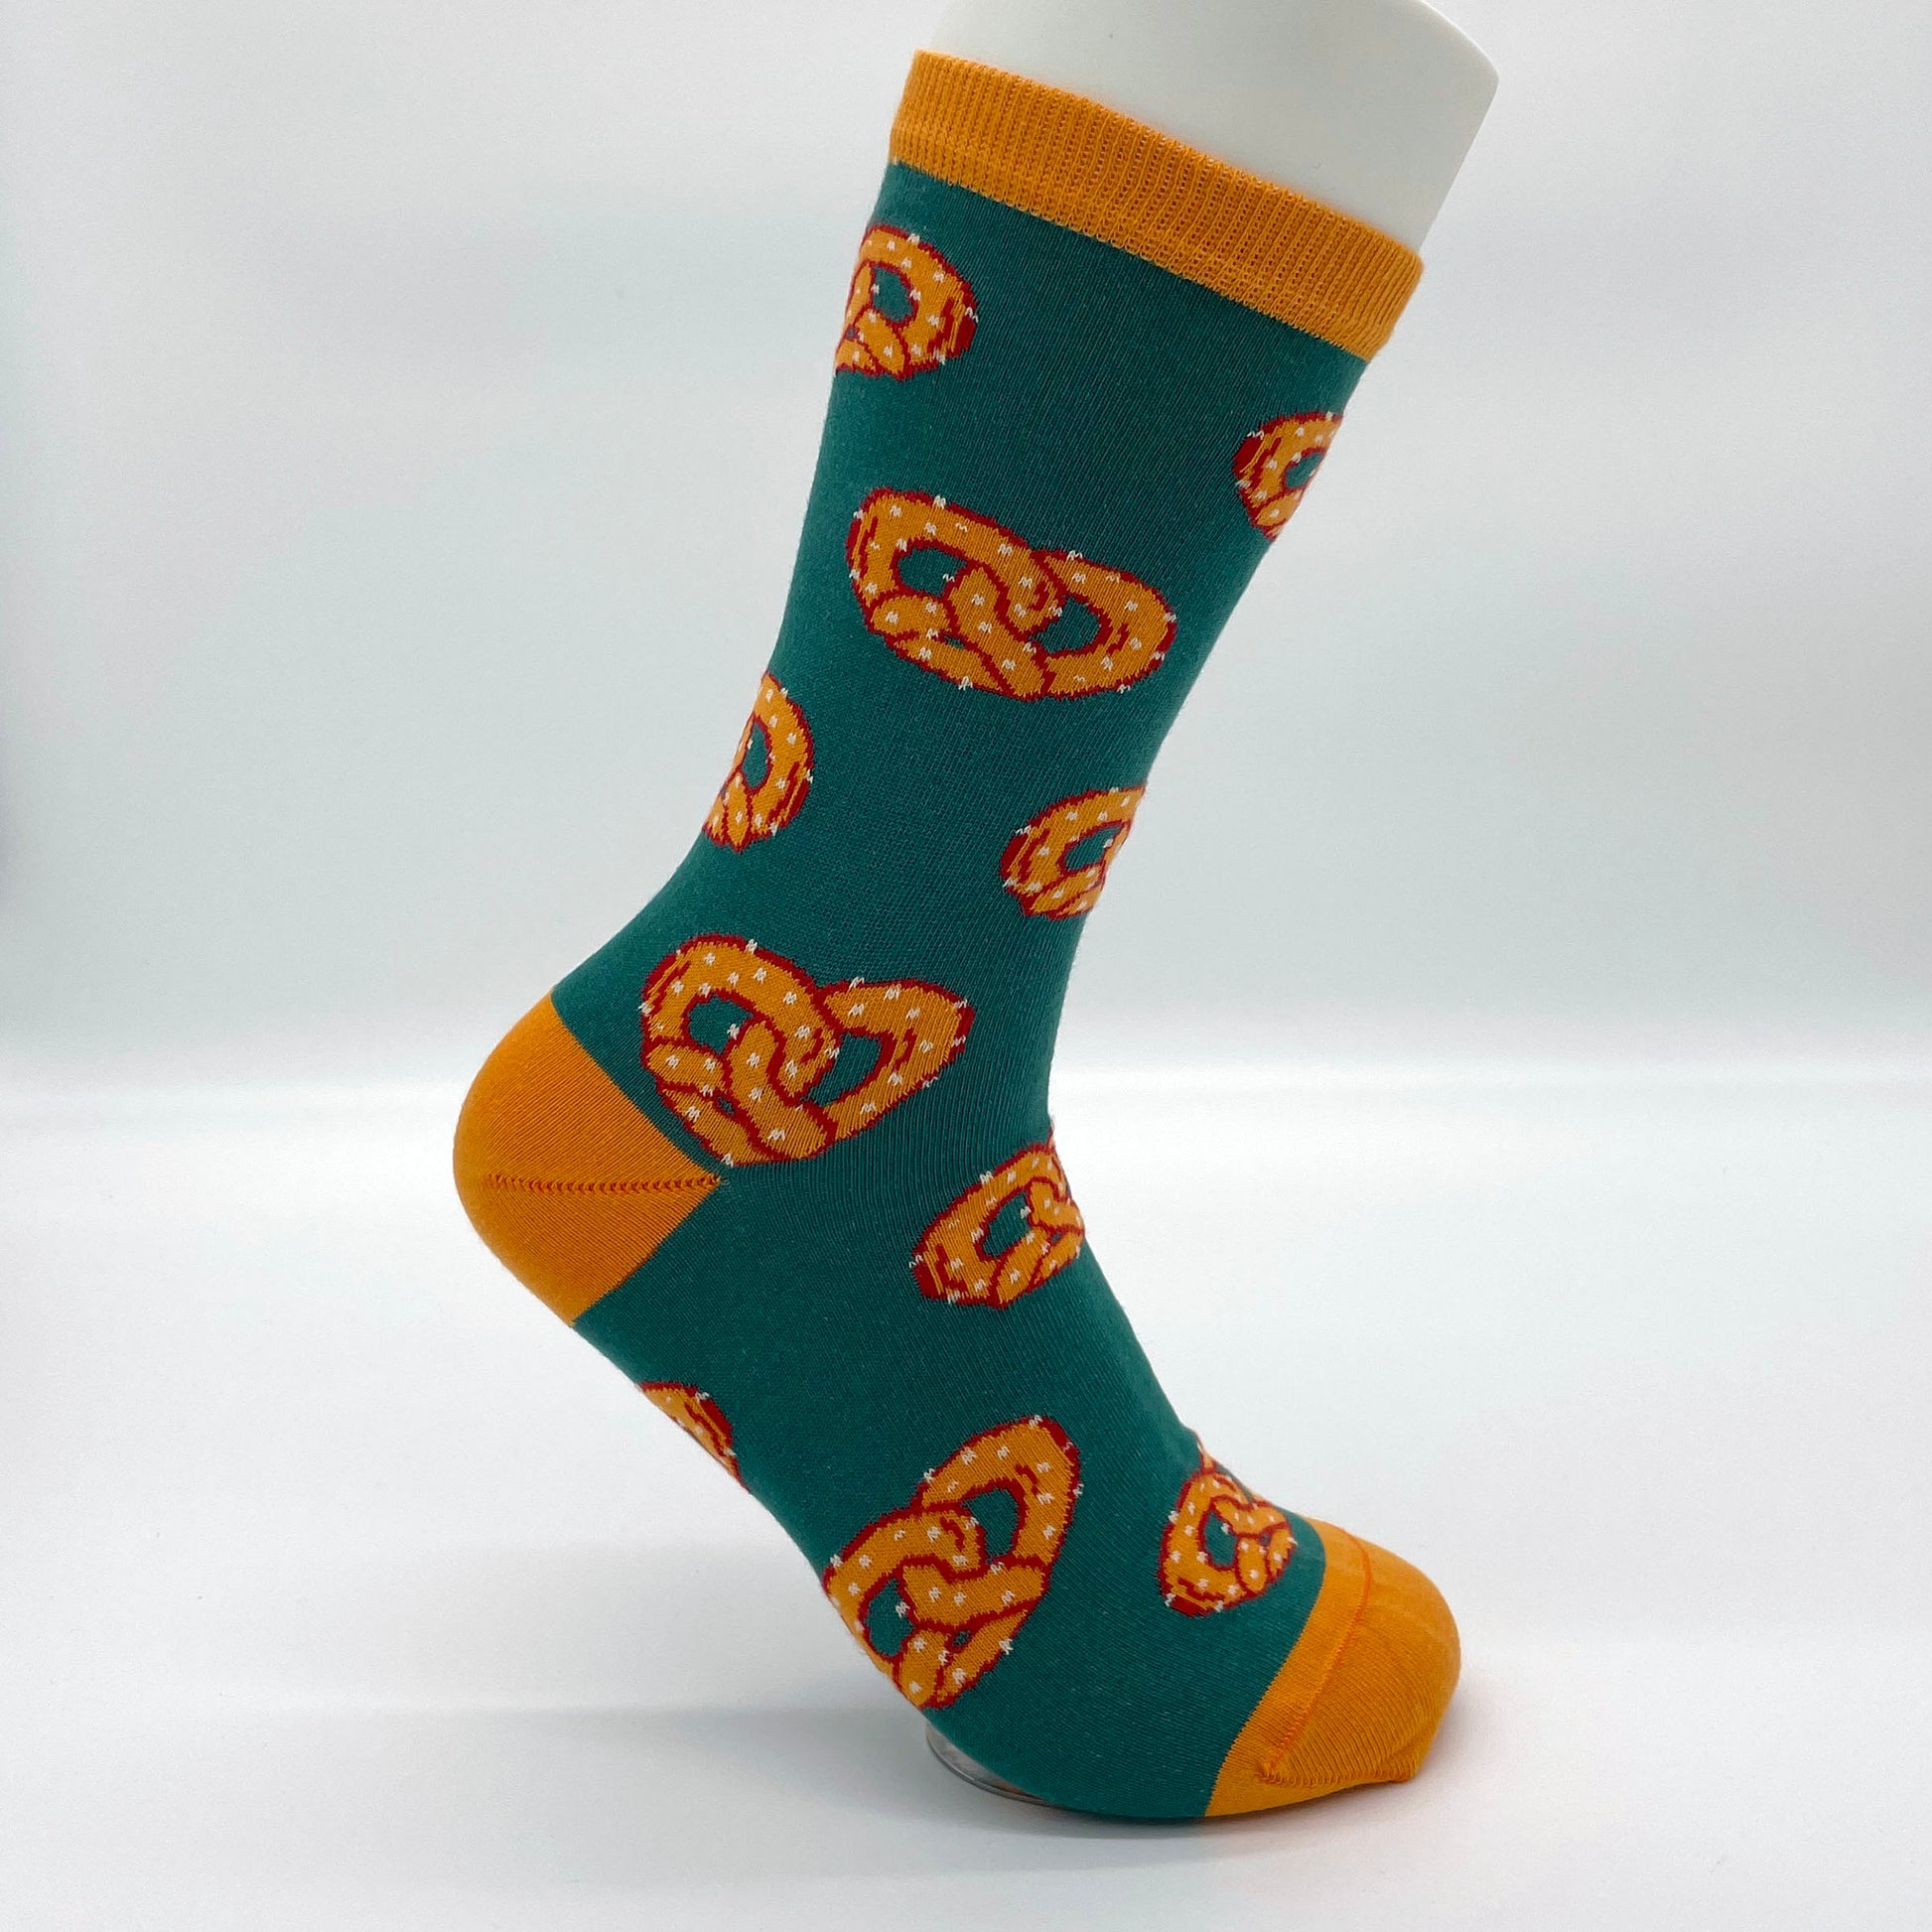 A white sock mannequin sports a green sock patterned with golden-orange salted soft pretzels. The welt, heel and toe of the sock are orange.